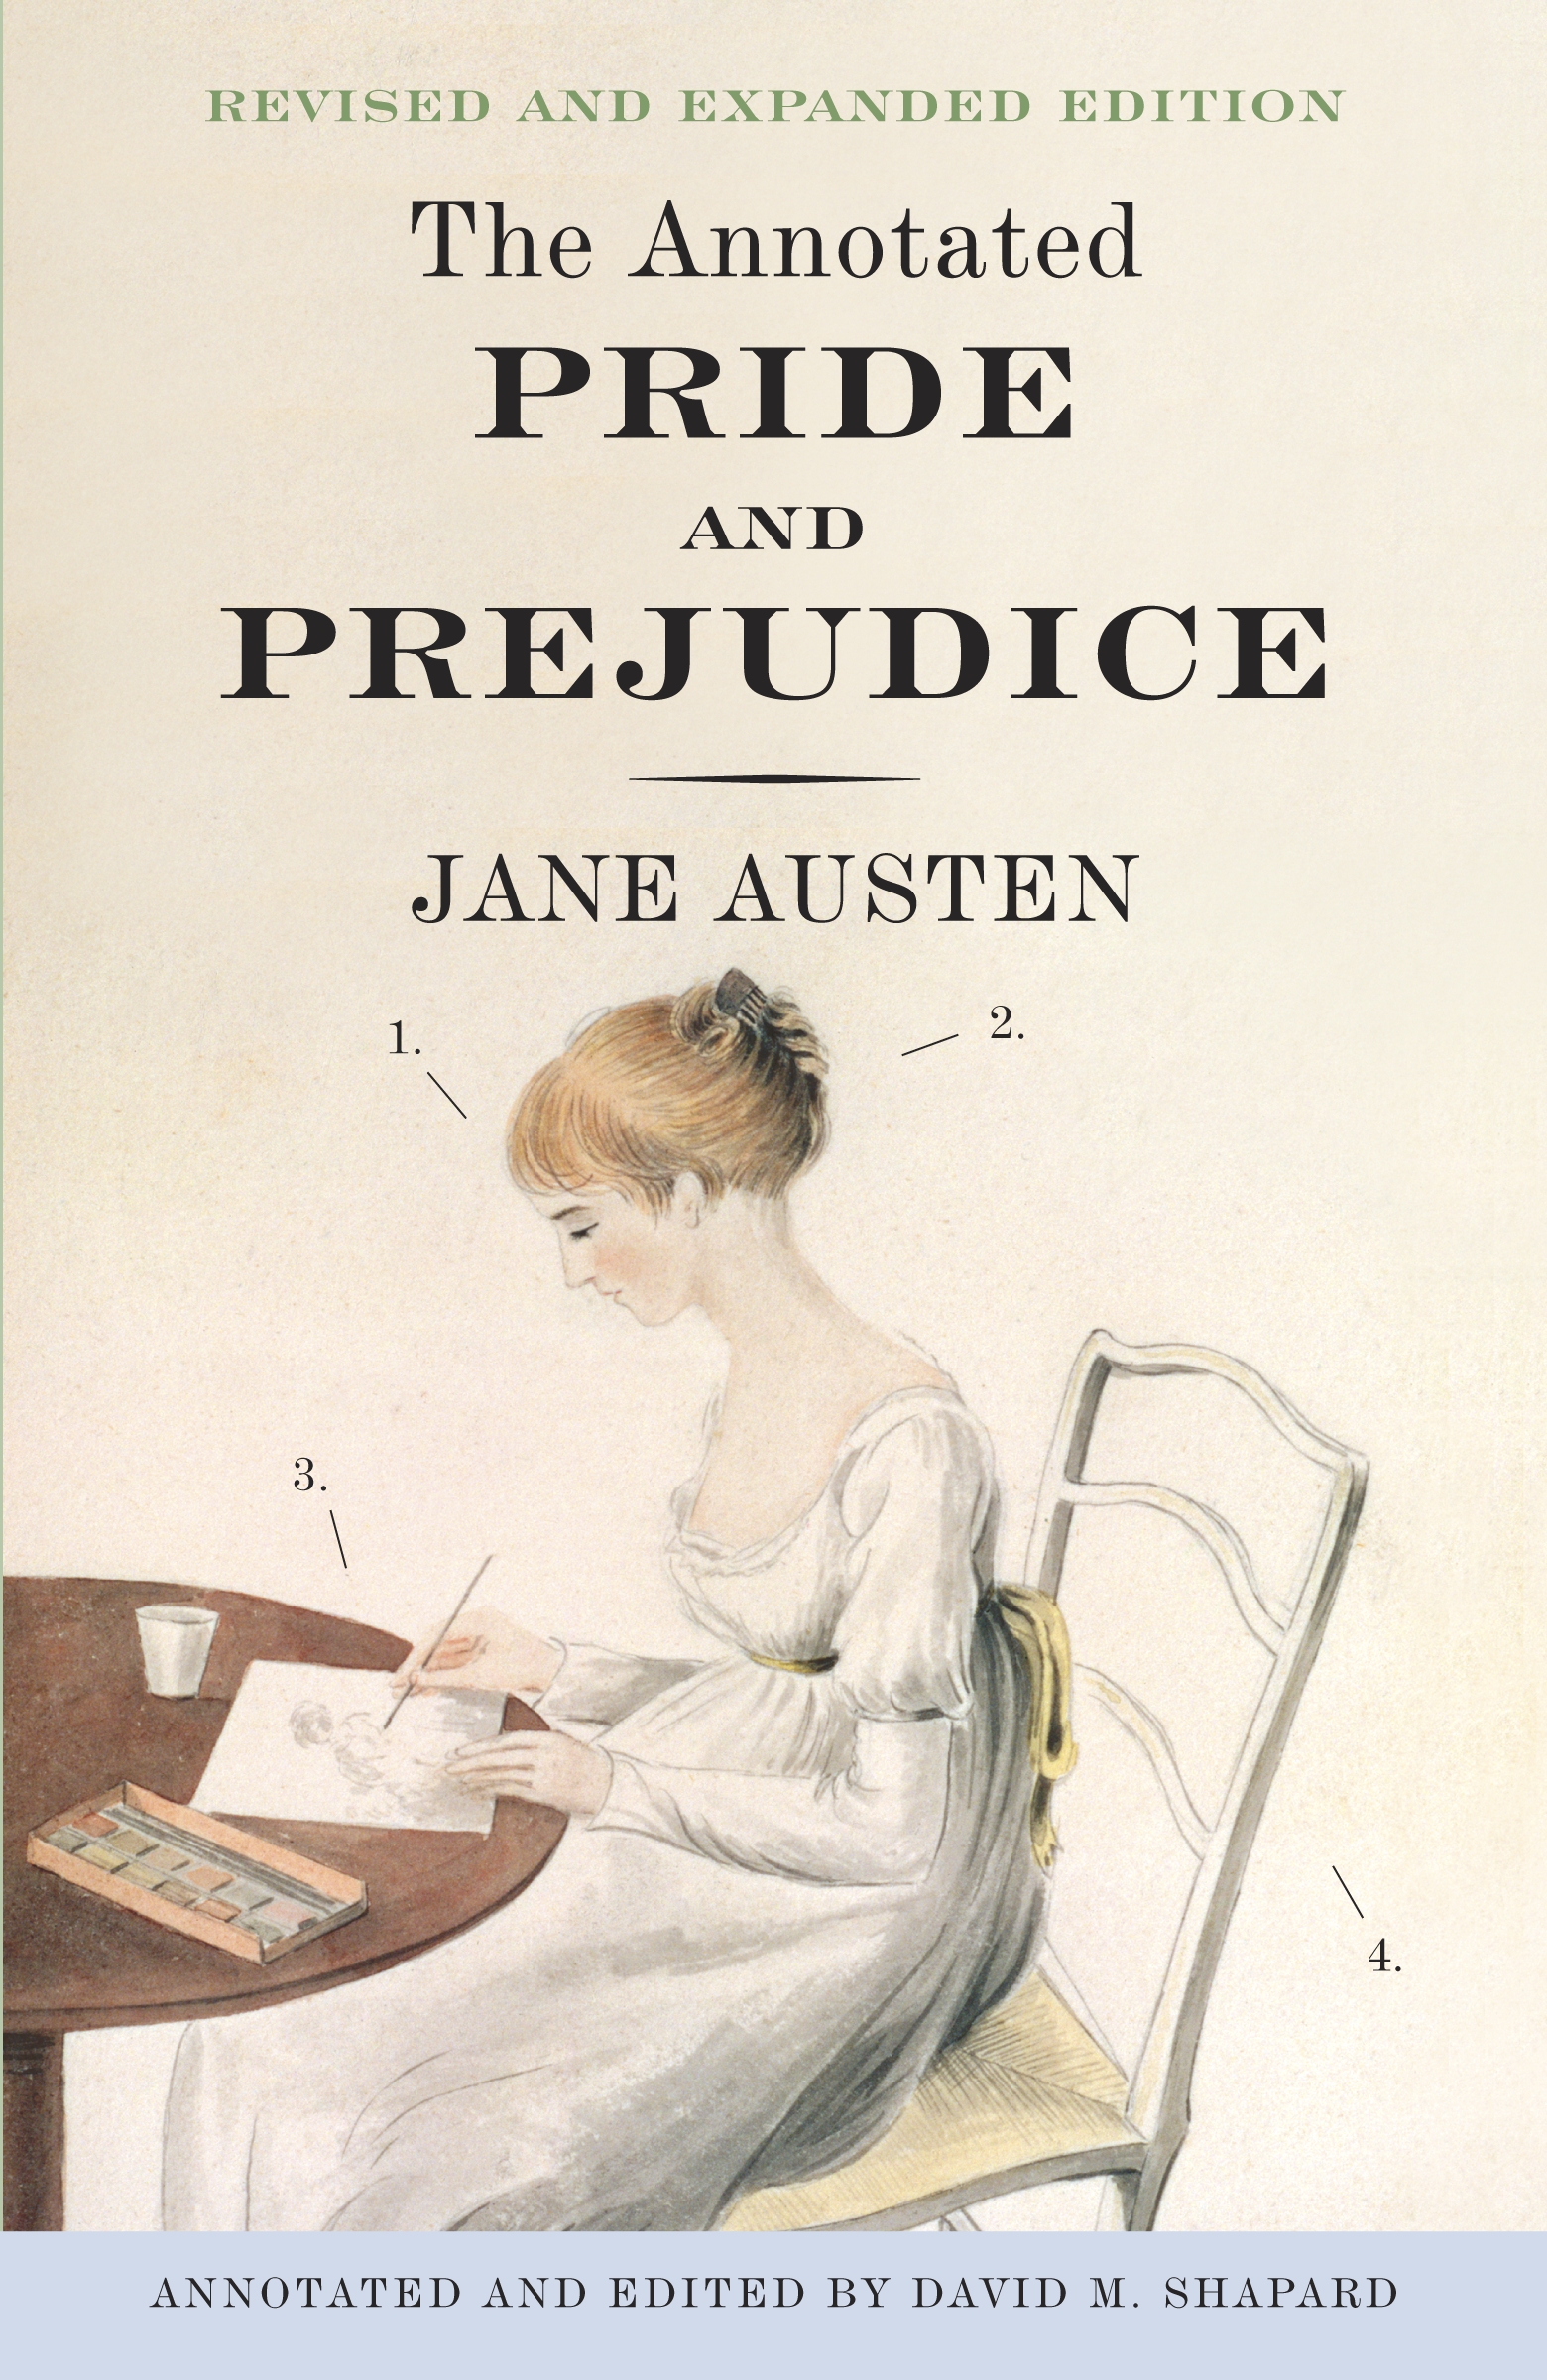 book review for pride and prejudice